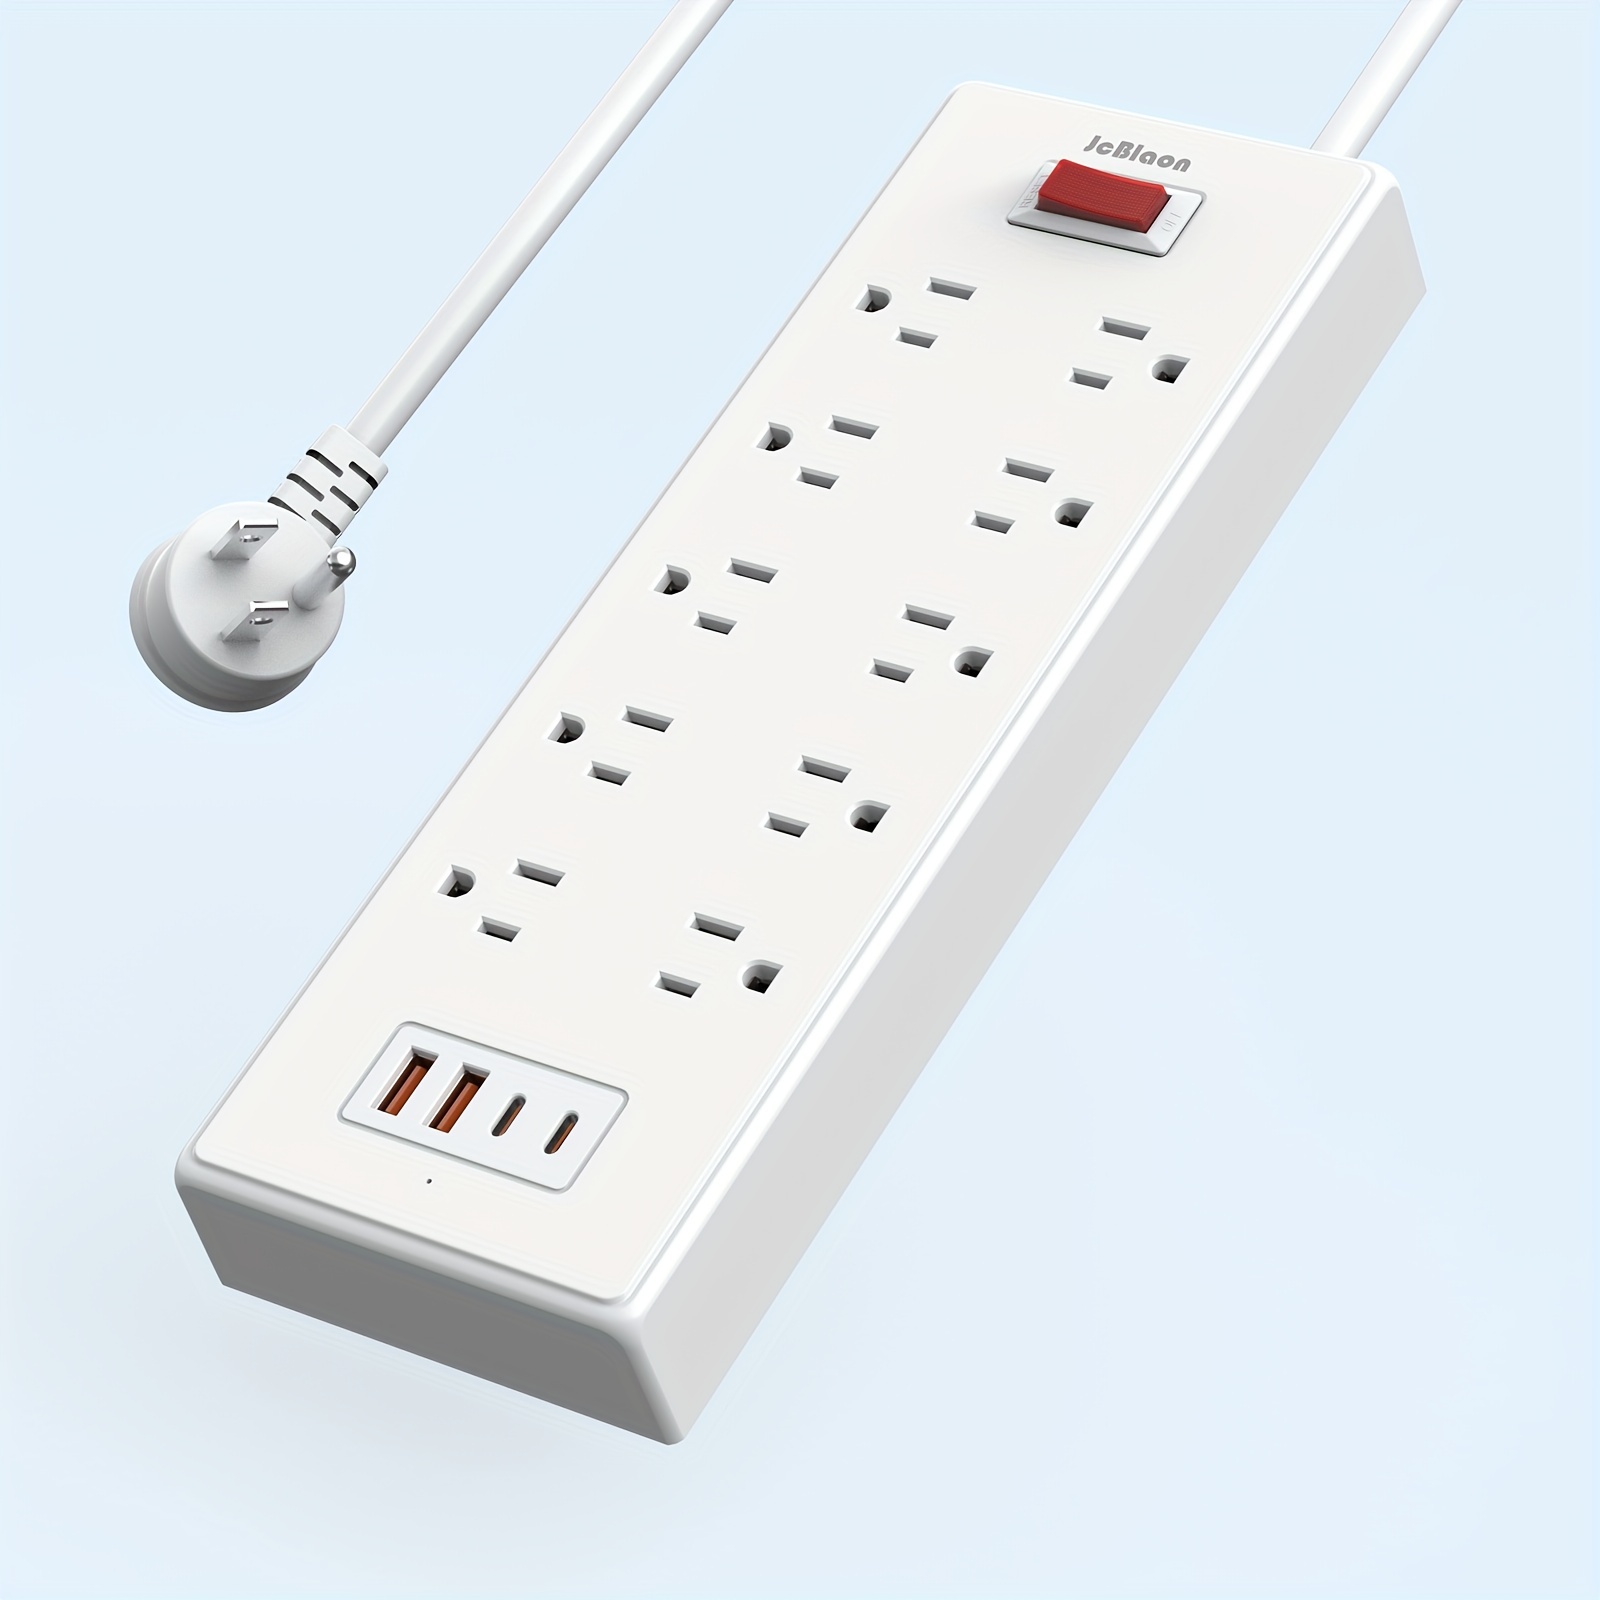 

Power Strip With Usb C Ports, 5ft Flat Plug Extension Cord With Multiple Outlets, Protector 10 Ac Outlets And 4 Usb Ports, Heavy Duty (1625w/13a), Wall Mount, Under Desk For Home, Office, Dorm